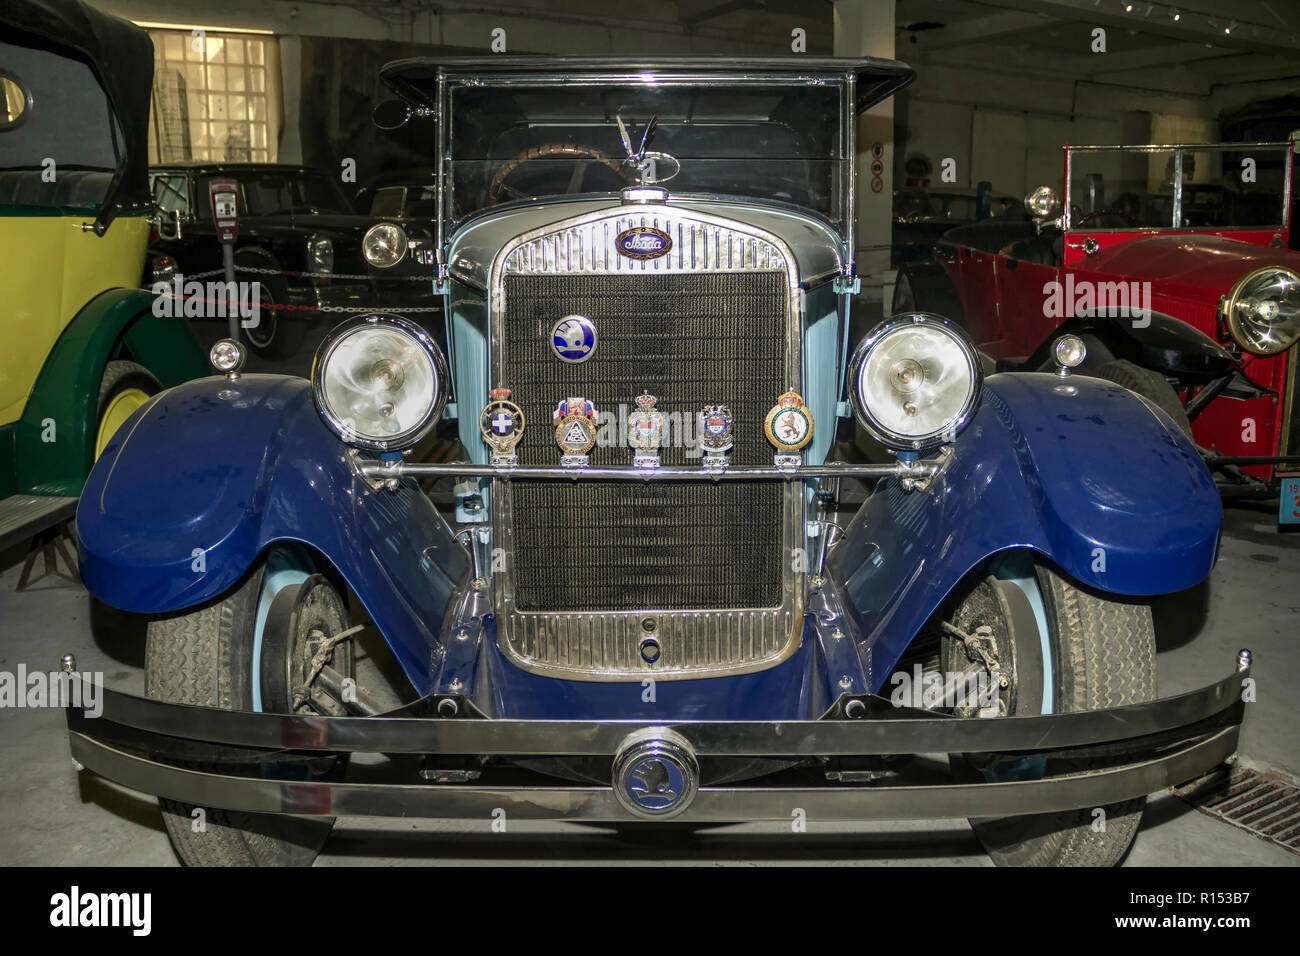 The Automobile Museum, Belgrade, Serbia, August 2018 - Vintage Skoda model 430 (1929) from the Collection of Bratislav Petkovic Stock Photo